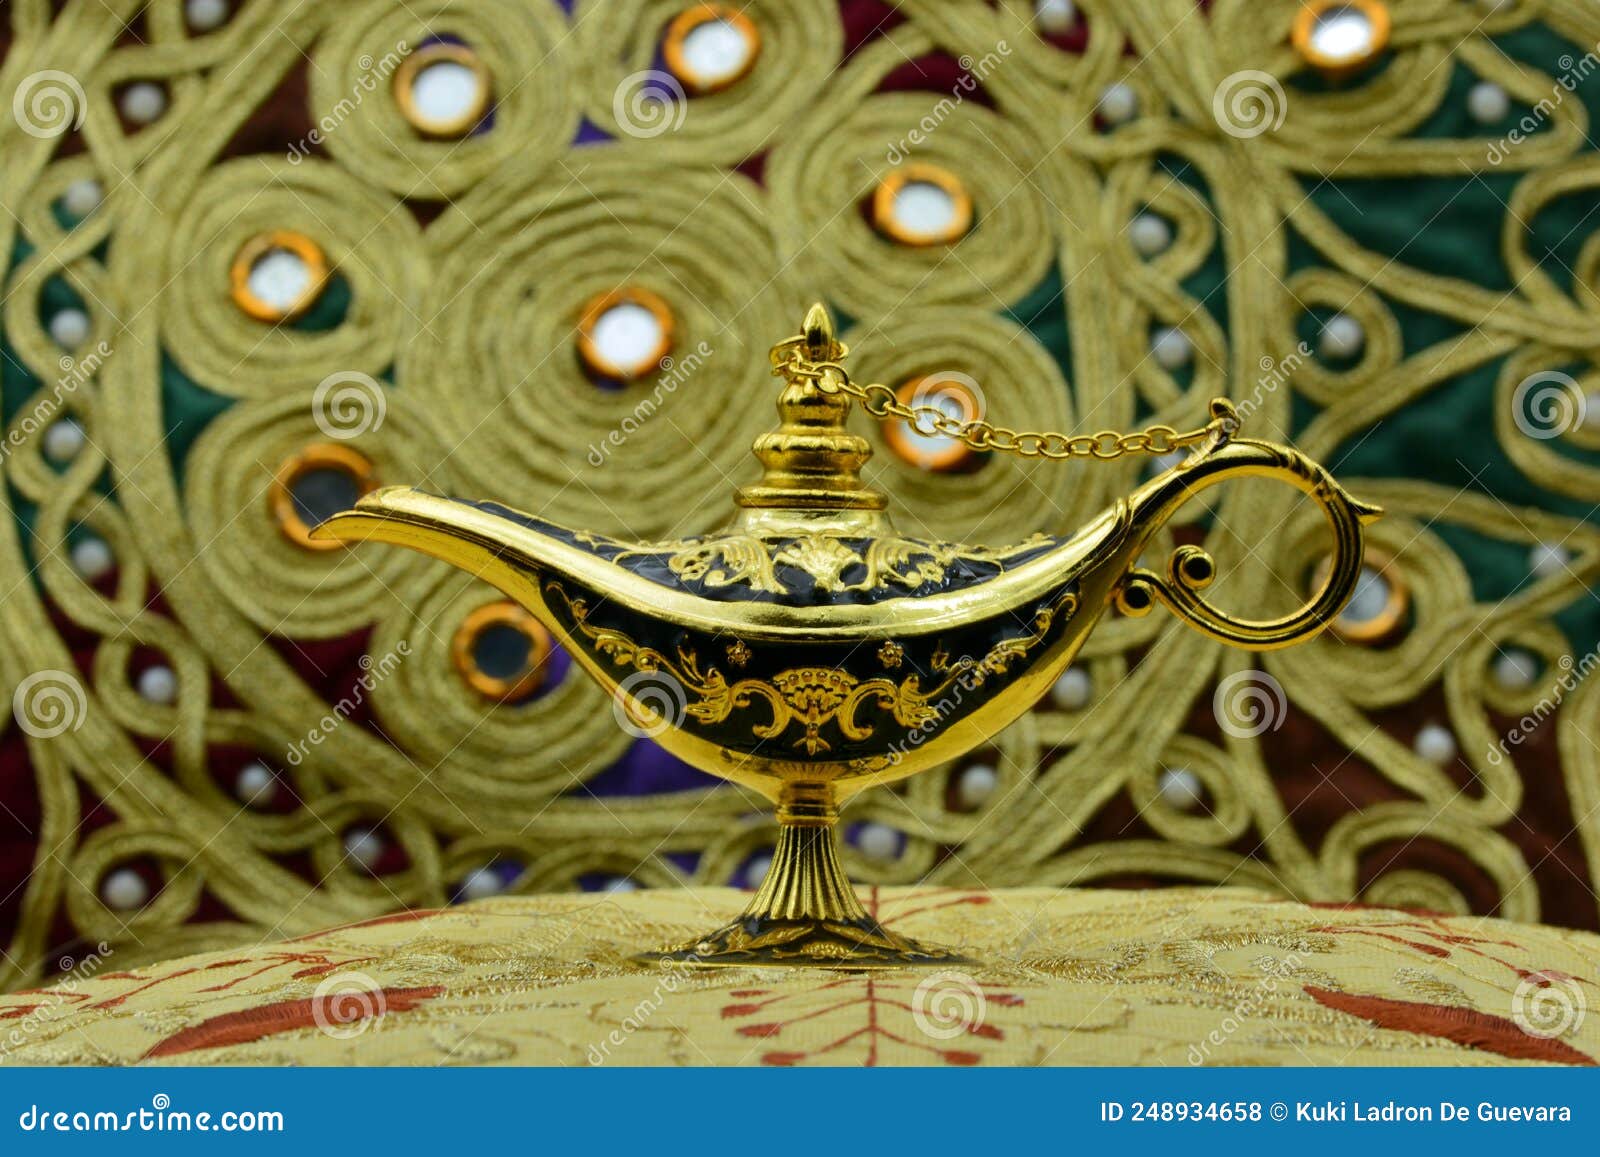 genie lamp, old oil lamp with arabic motifs